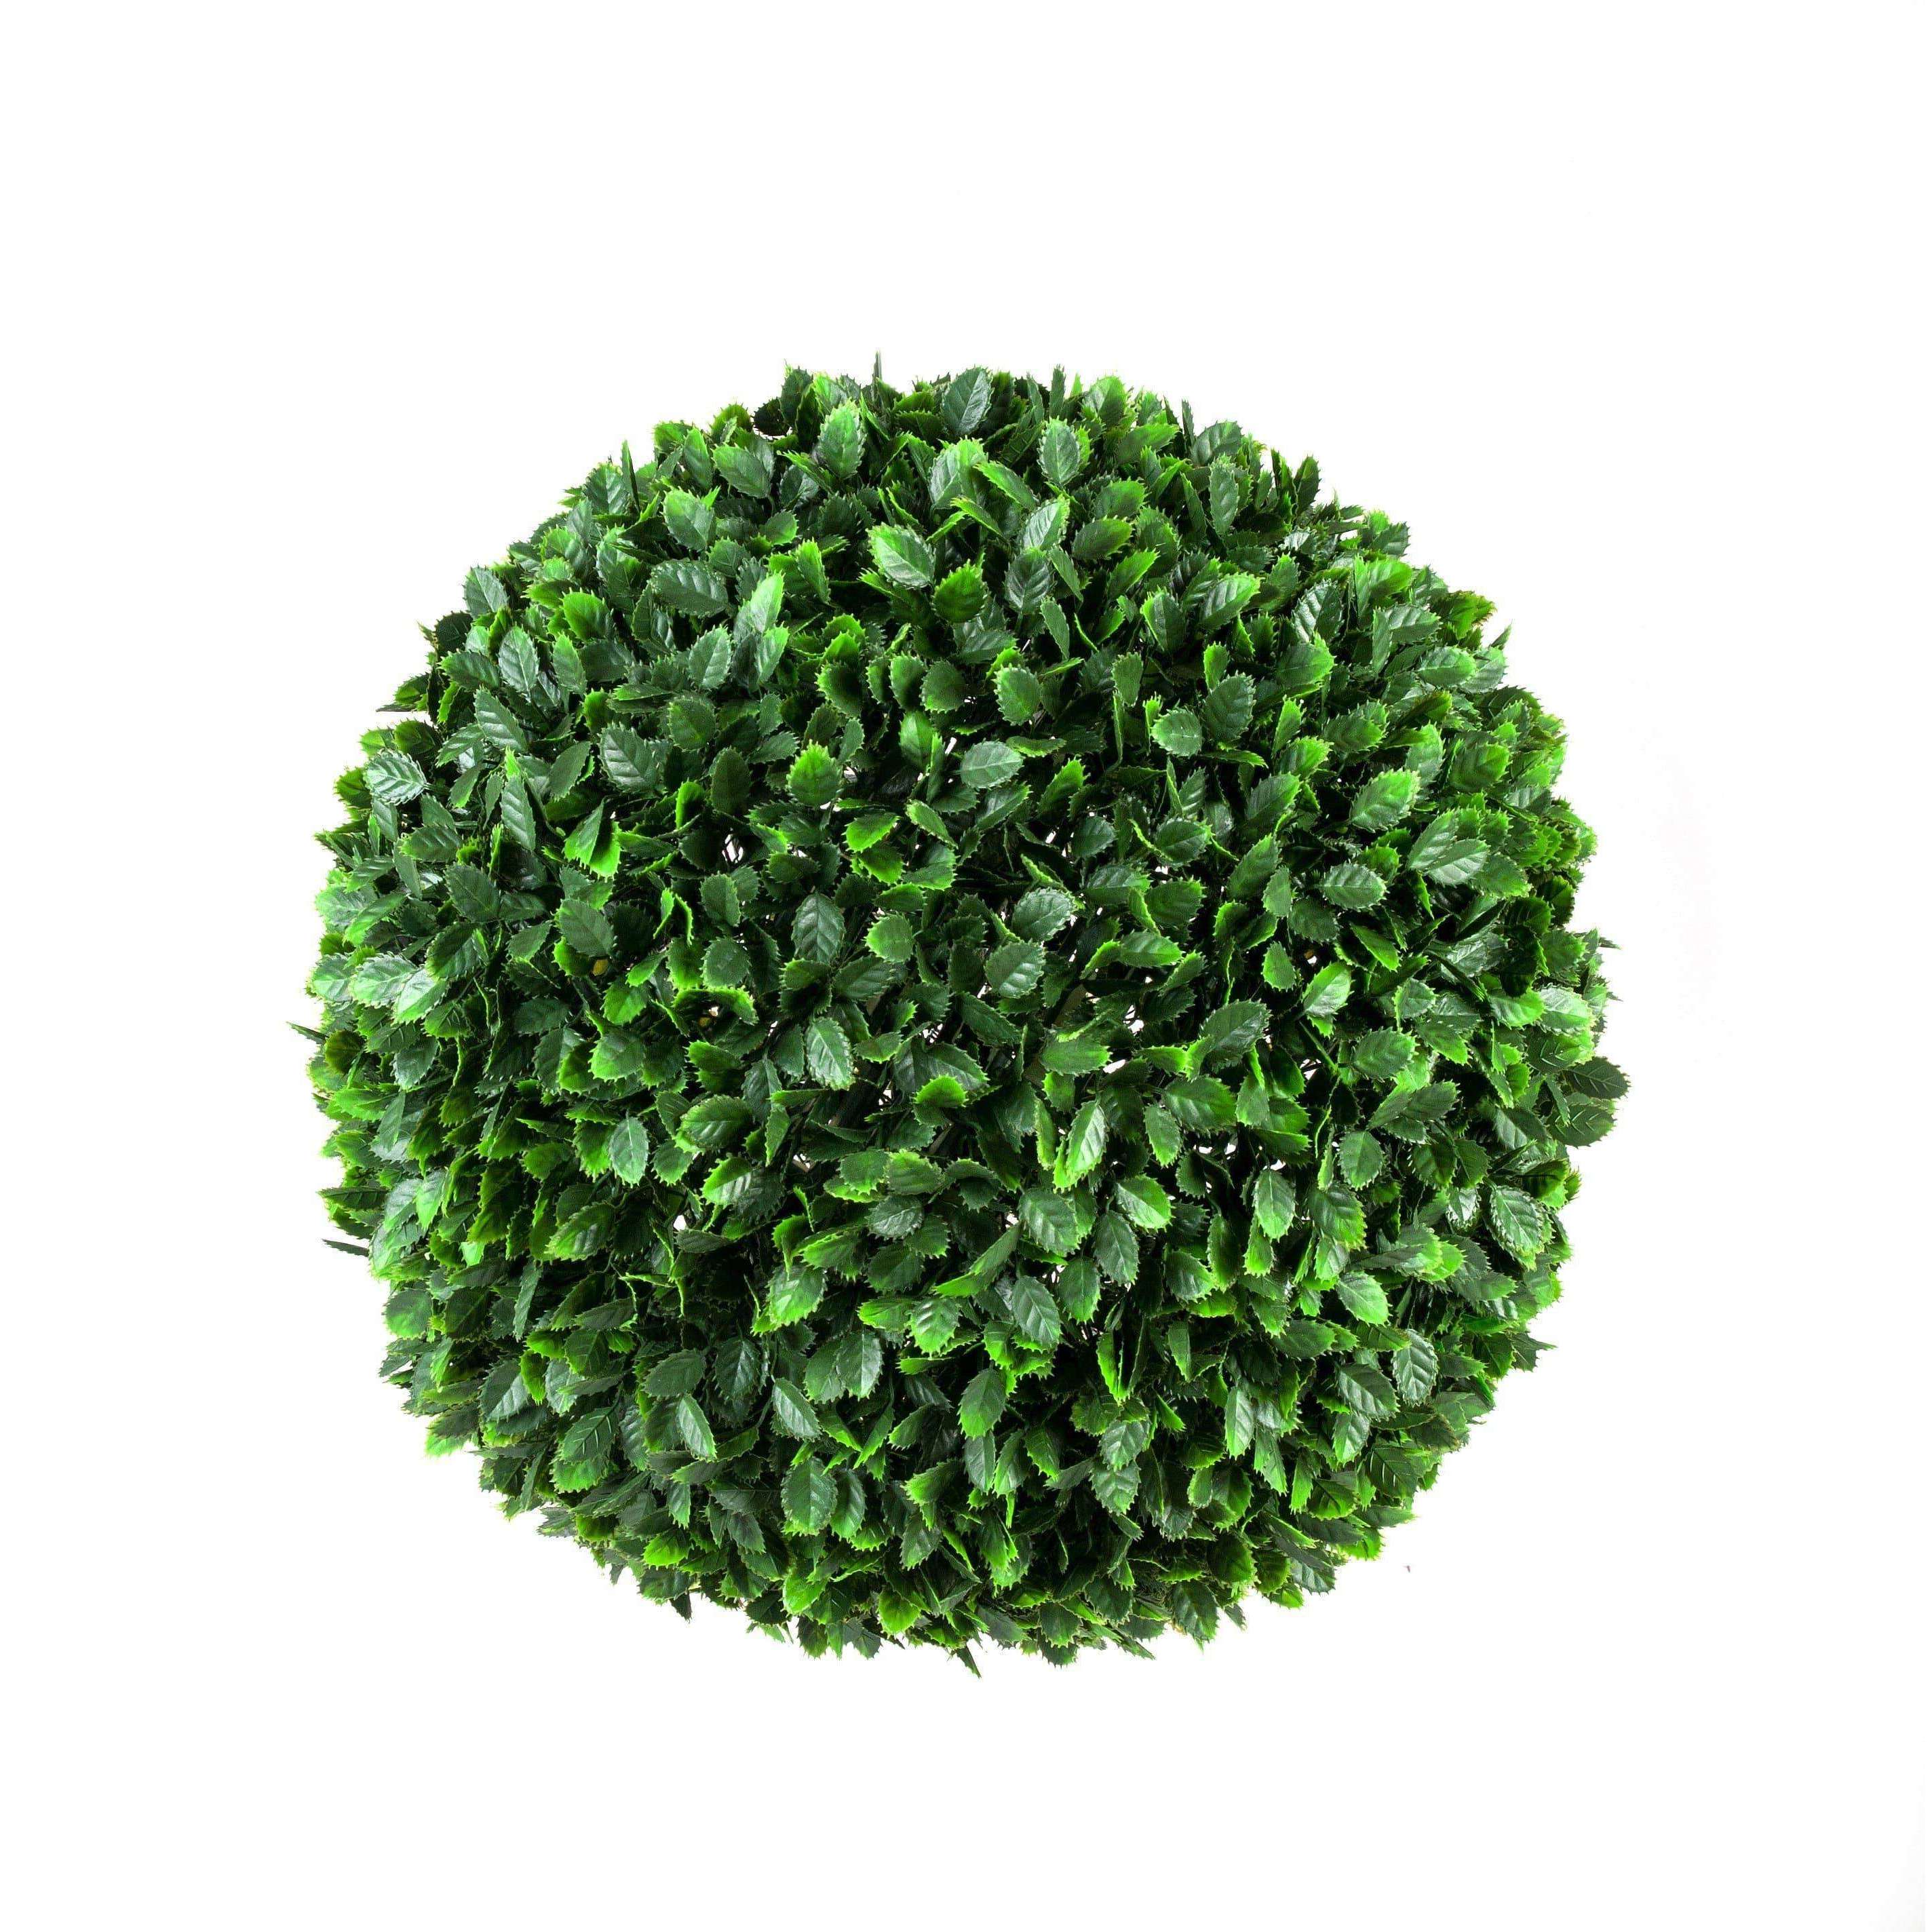 Large Artificial UV Resistant Rose Topiary Ball 48cm - Designer Vertical Gardens artificial green wall sydney artificial hedges sydney